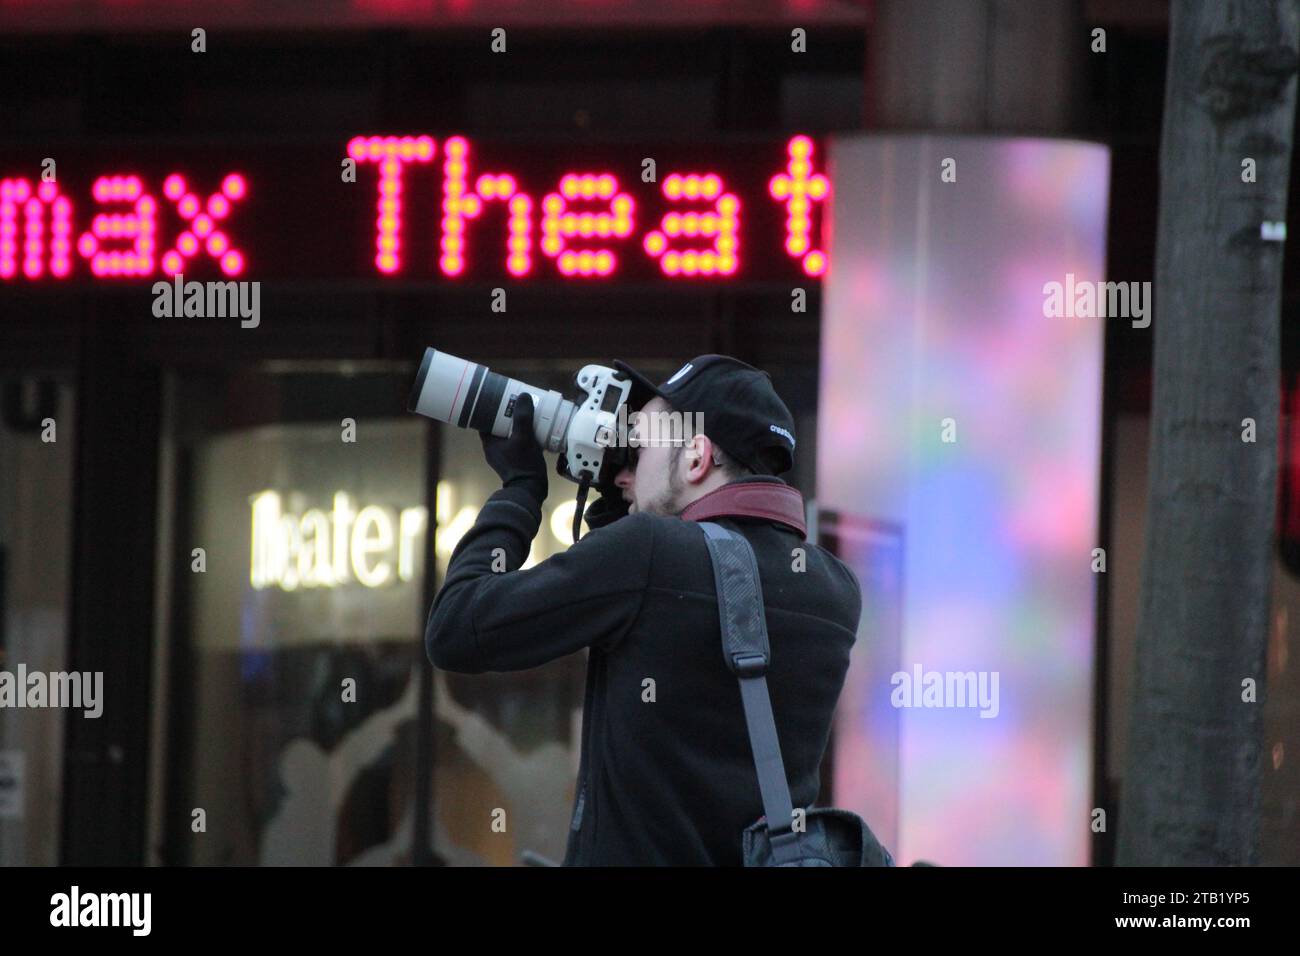 A man with a digital camera is capturing a stunning shot of a cityscape with a computer monitor visible in the foreground Stock Photo